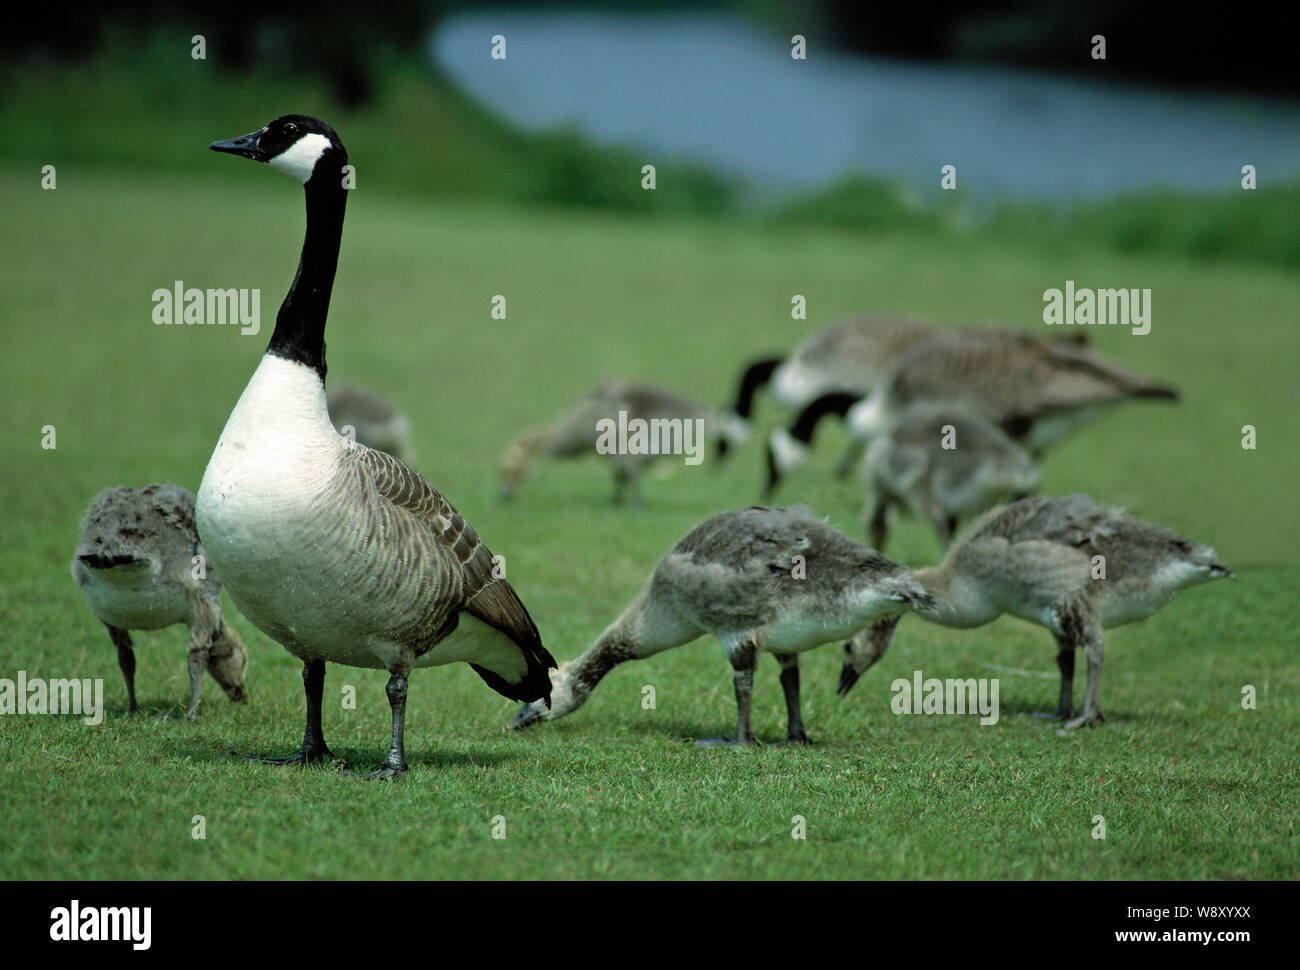 CANADA GOOSE families, on grass (Branta canadensis) with others grazing behind. Month old goslings. Broadland. Norfolk. An introduced species to the UK. Stock Photo